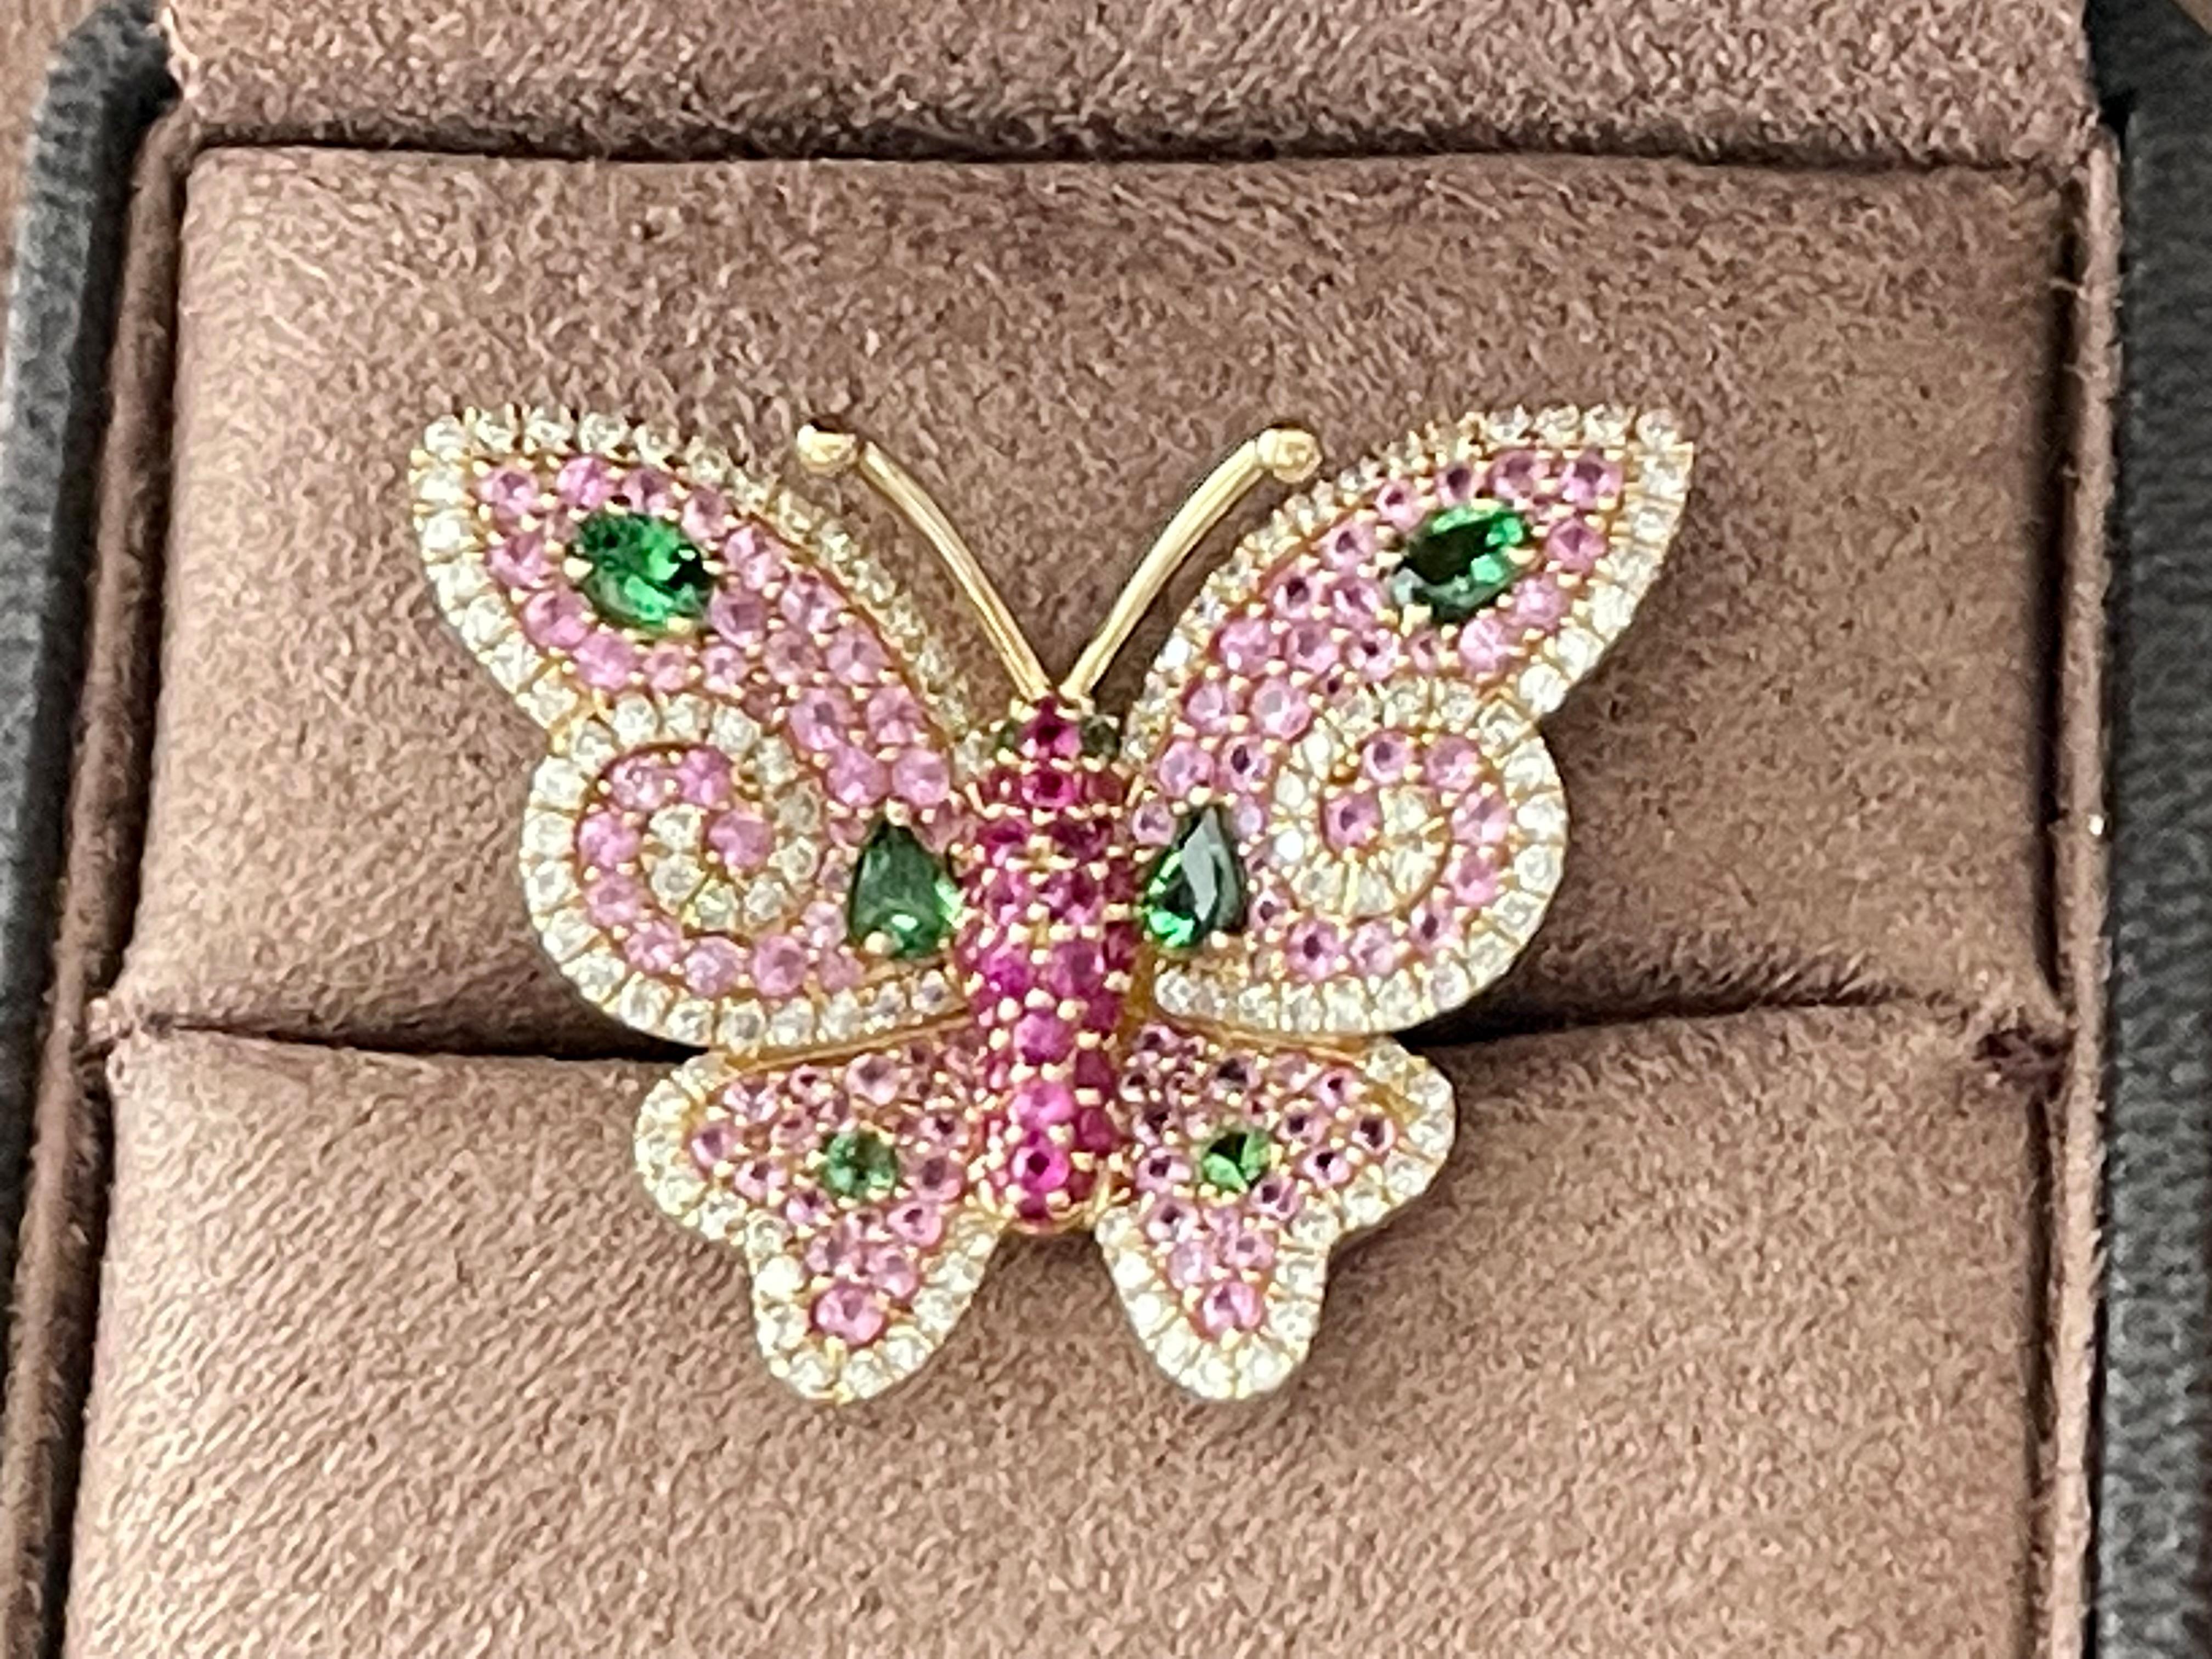 Fantastic 18 K rose Gold Butterfly Ring. This butterfly is ready to take a flight covered with precious gems. The butterfly is covered with 29 pave set Rubies 0.48 ct, 106 pink Sapphires 1.69 ct, 8 vivid Tsavorites 0.79 ct and 114 brilliant cut